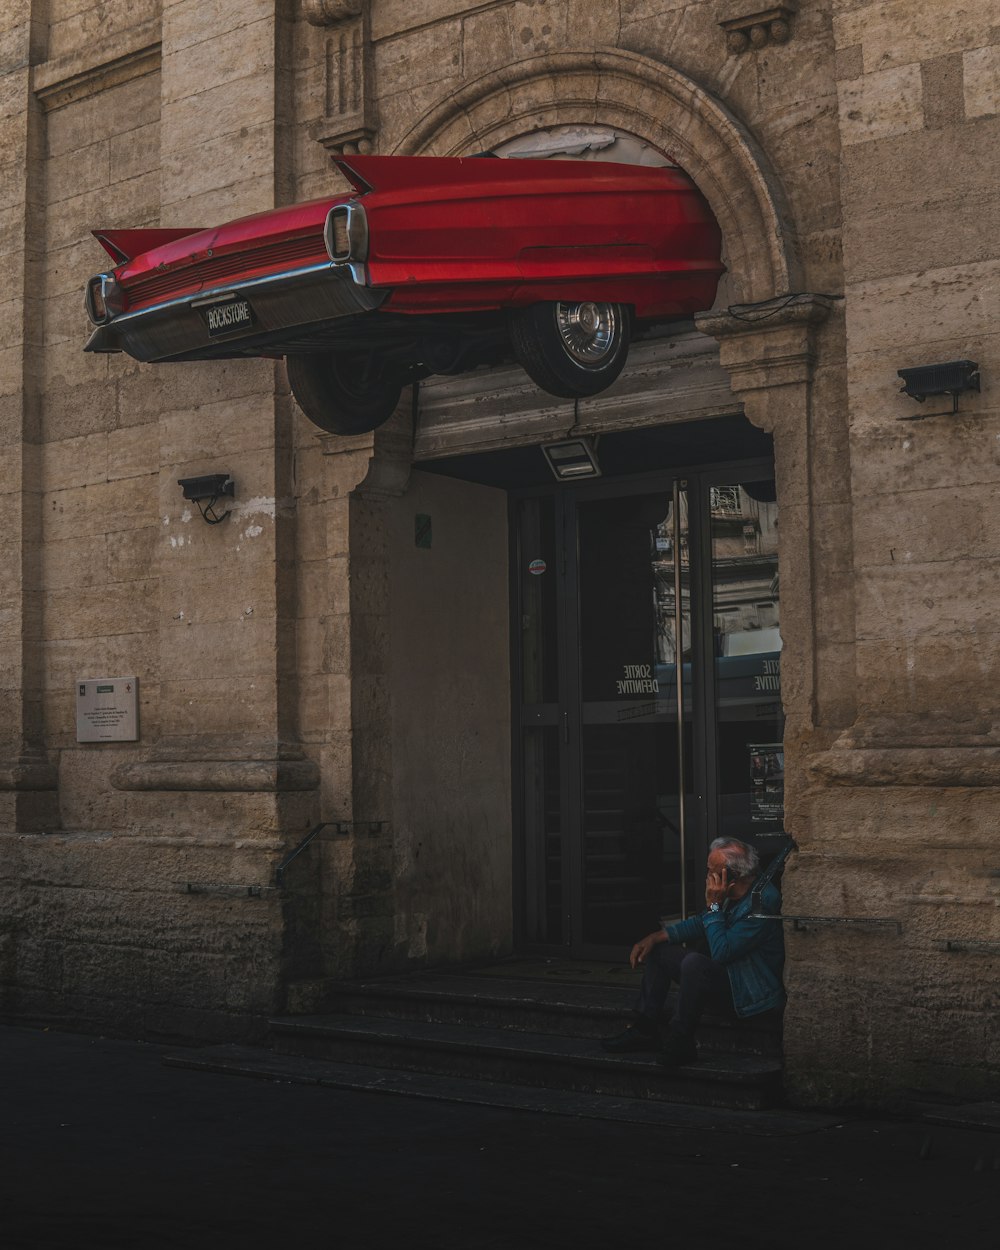 a person sitting on the steps of a building with a red car flying over him